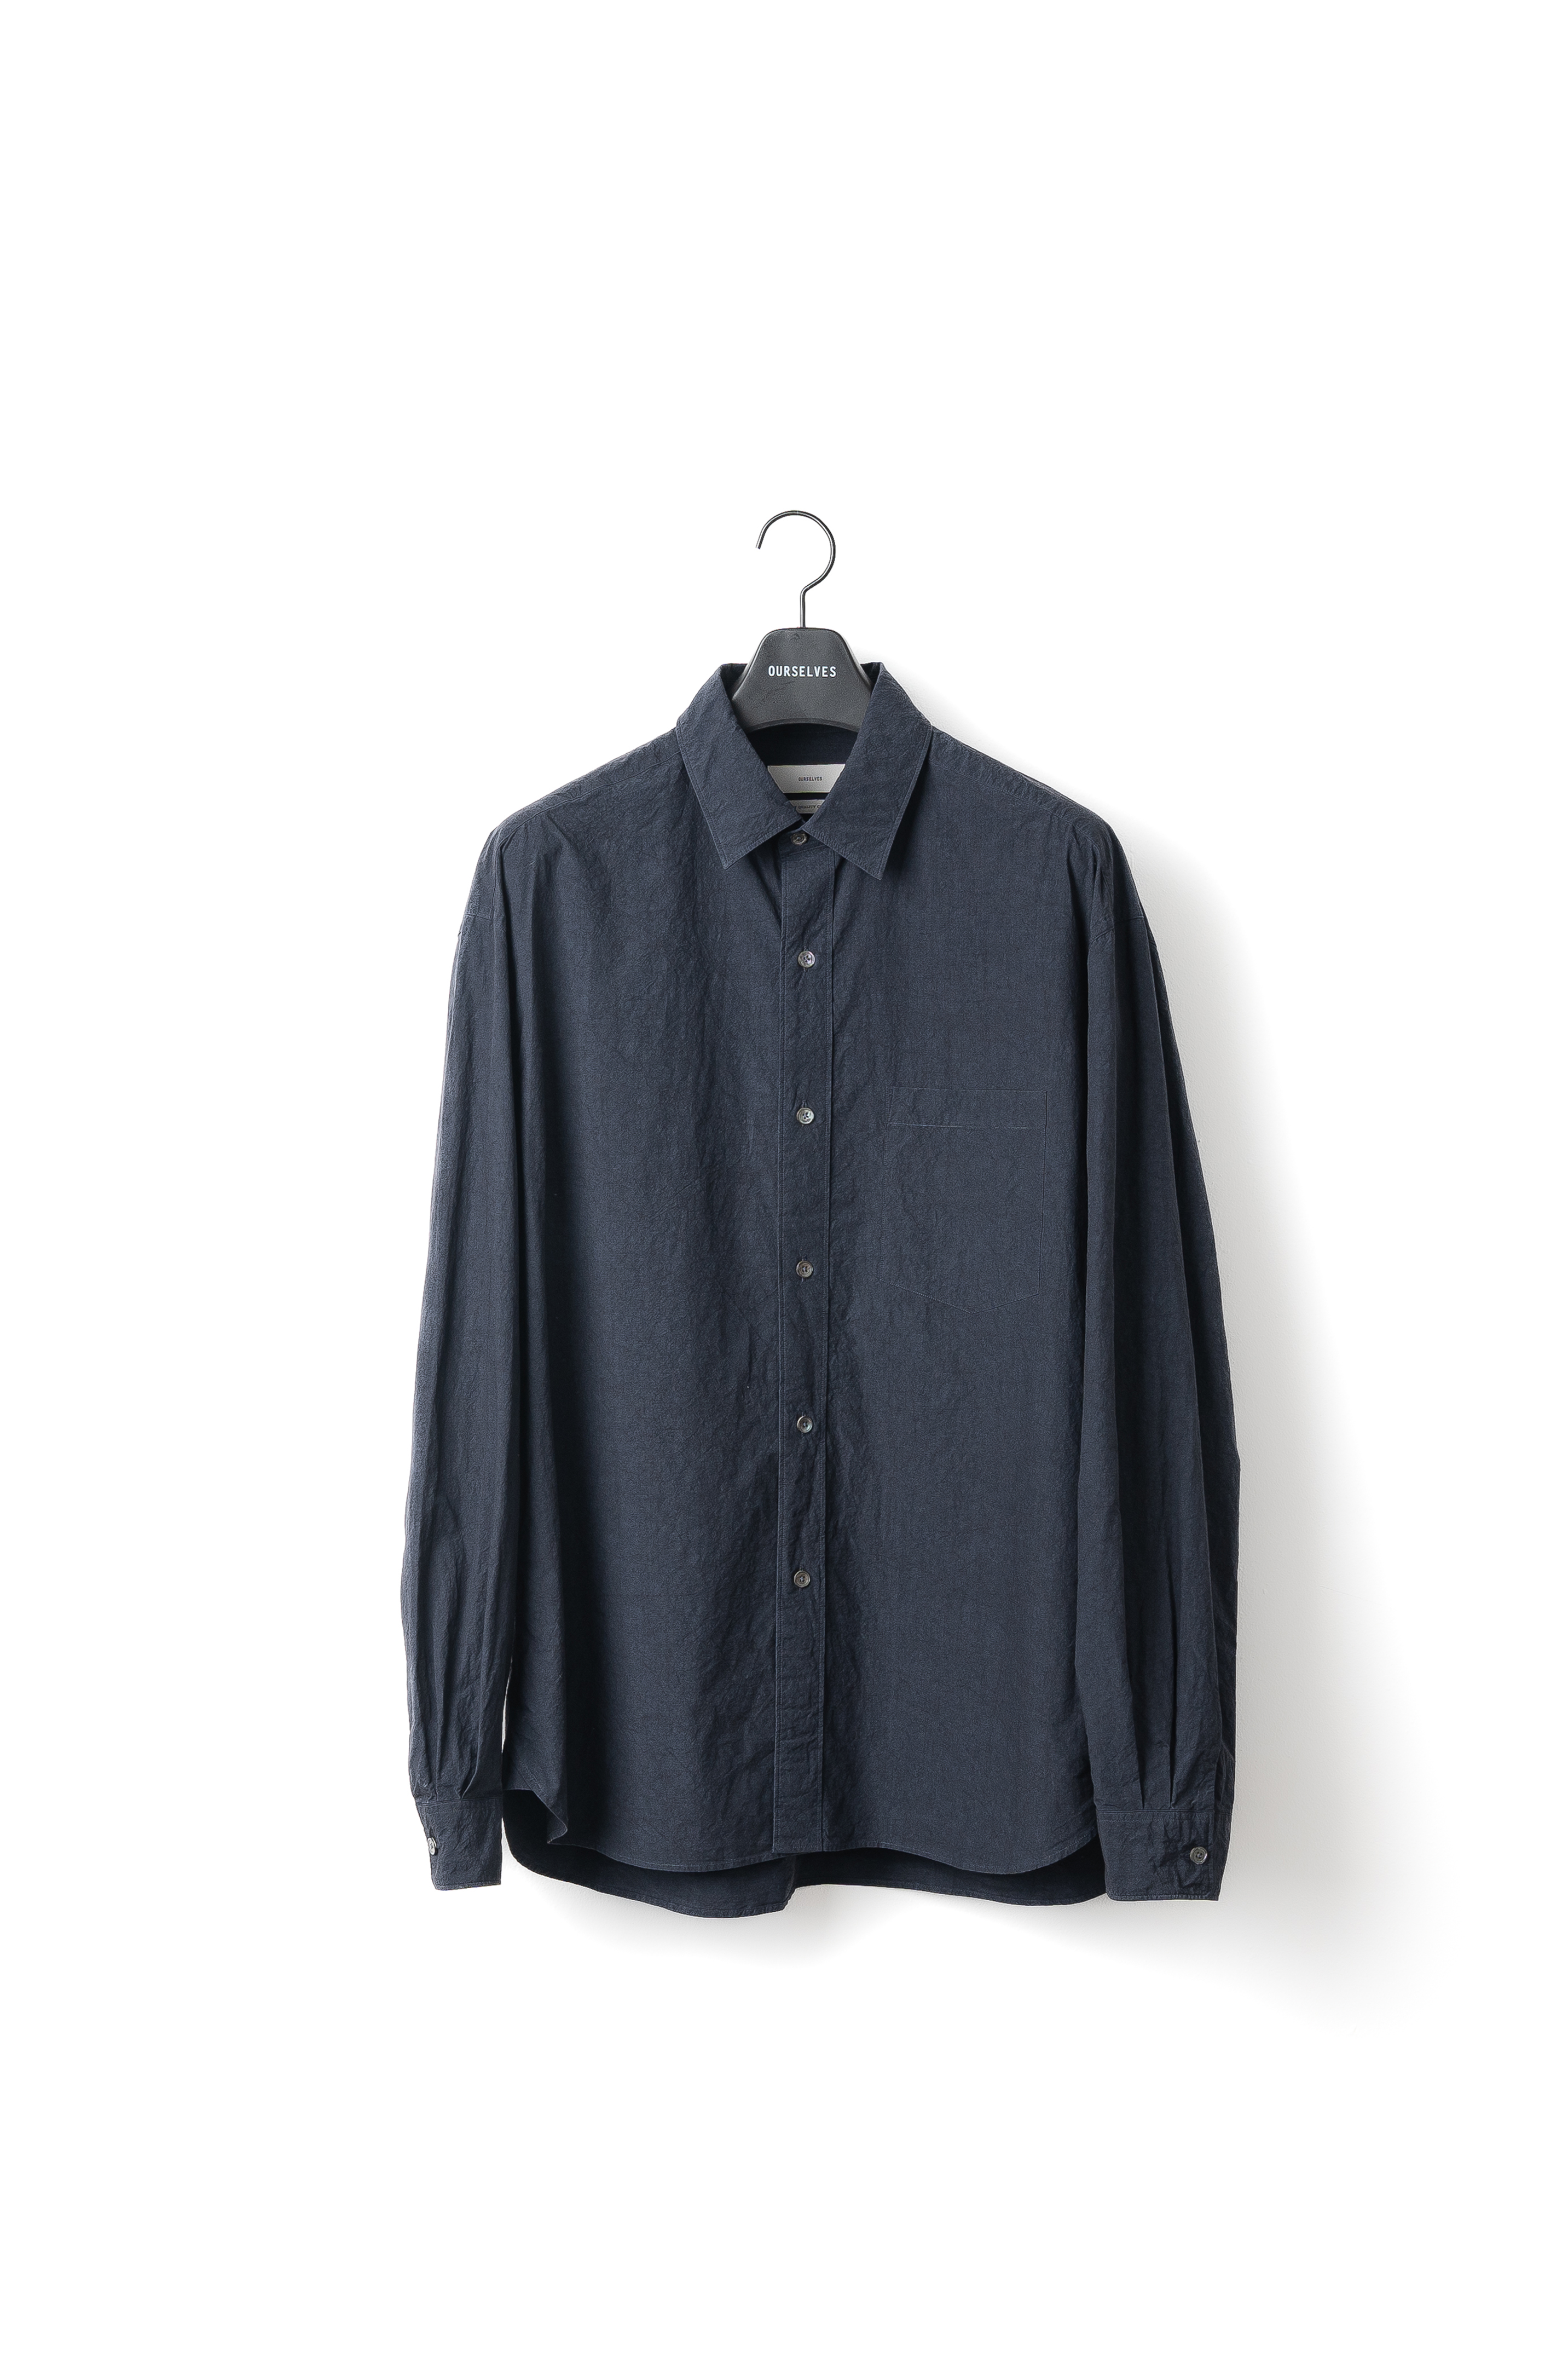 Texture Typewriter Relaxed Shirts - Navy